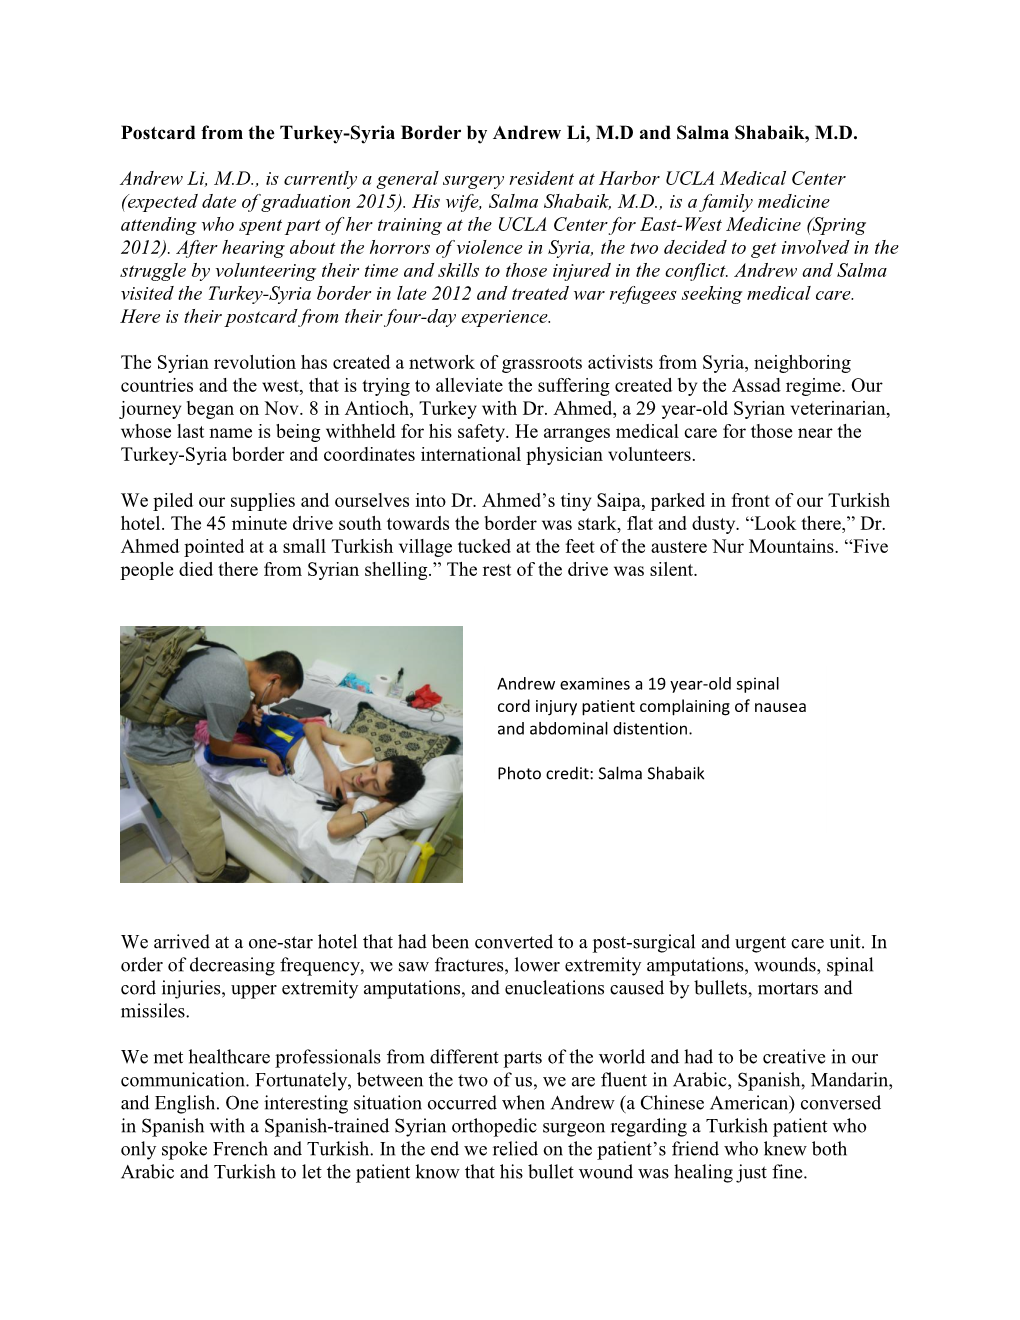 Postcard from the Turkey-Syria Border by Andrew Li, M.D and Salma Shabaik, M.D. Andrew Li, M.D., Is Currently a General Surgery